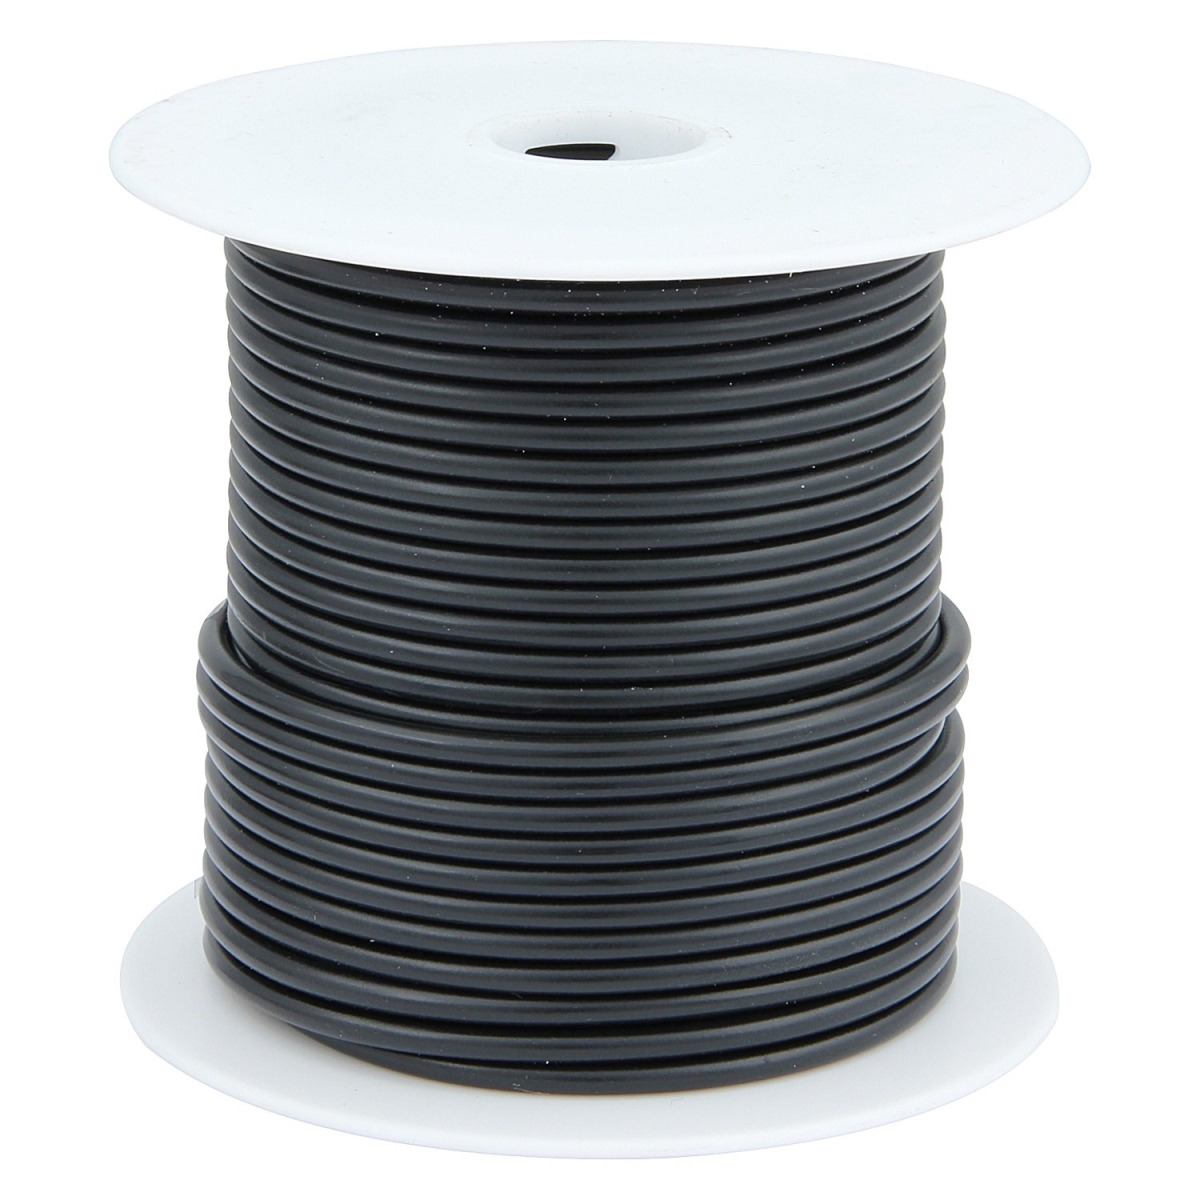 All76551 100 Ft. 14 Awg Black Primary Wire